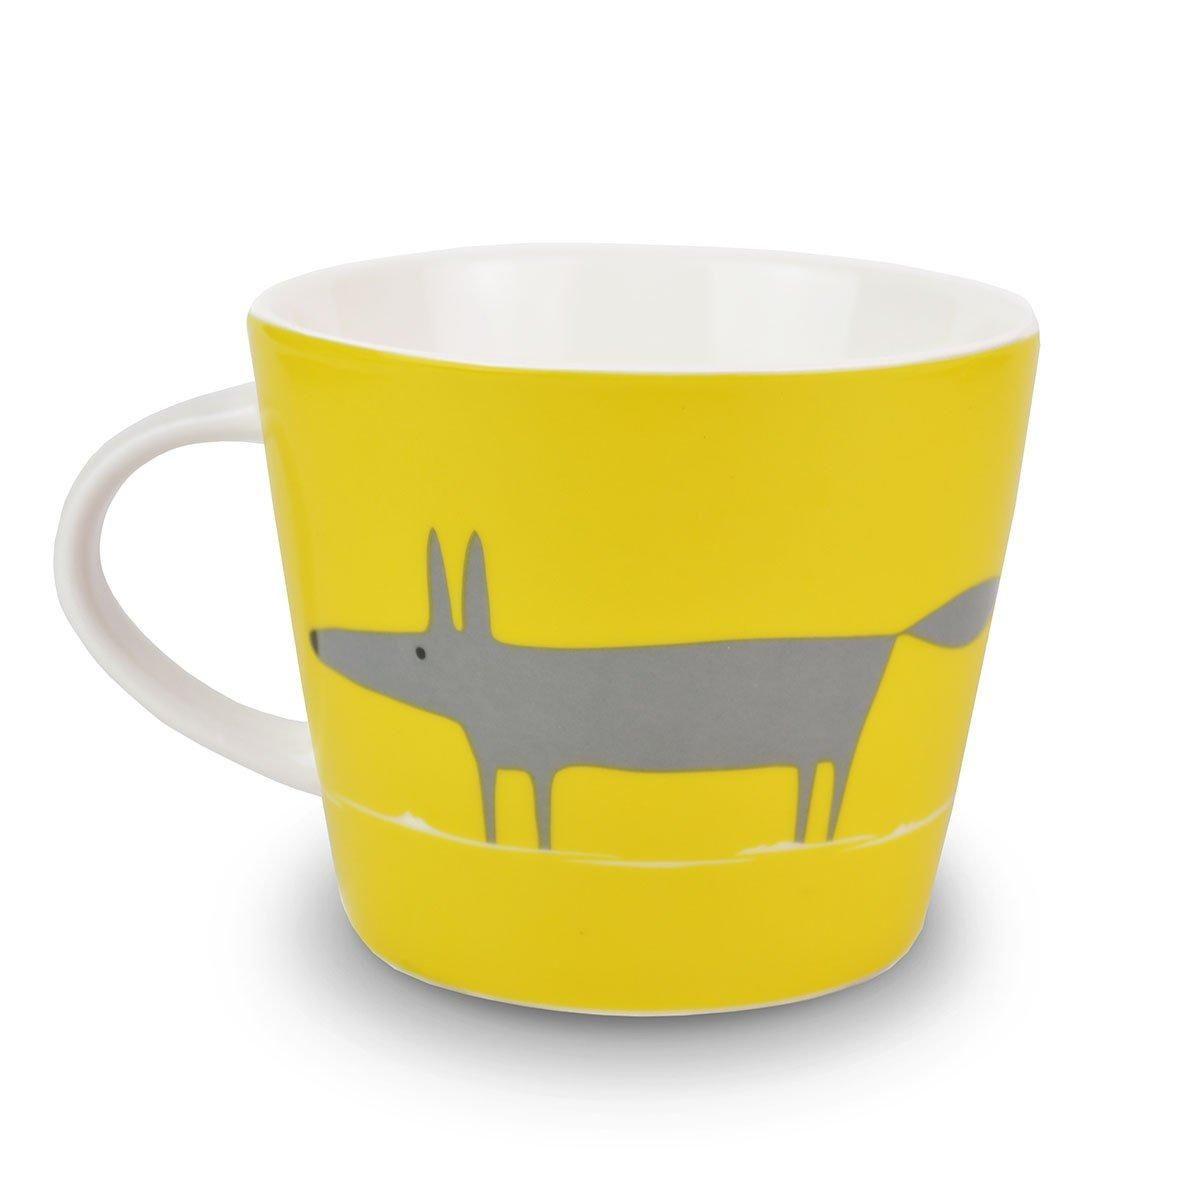  Mugs And Cups SC-0014 